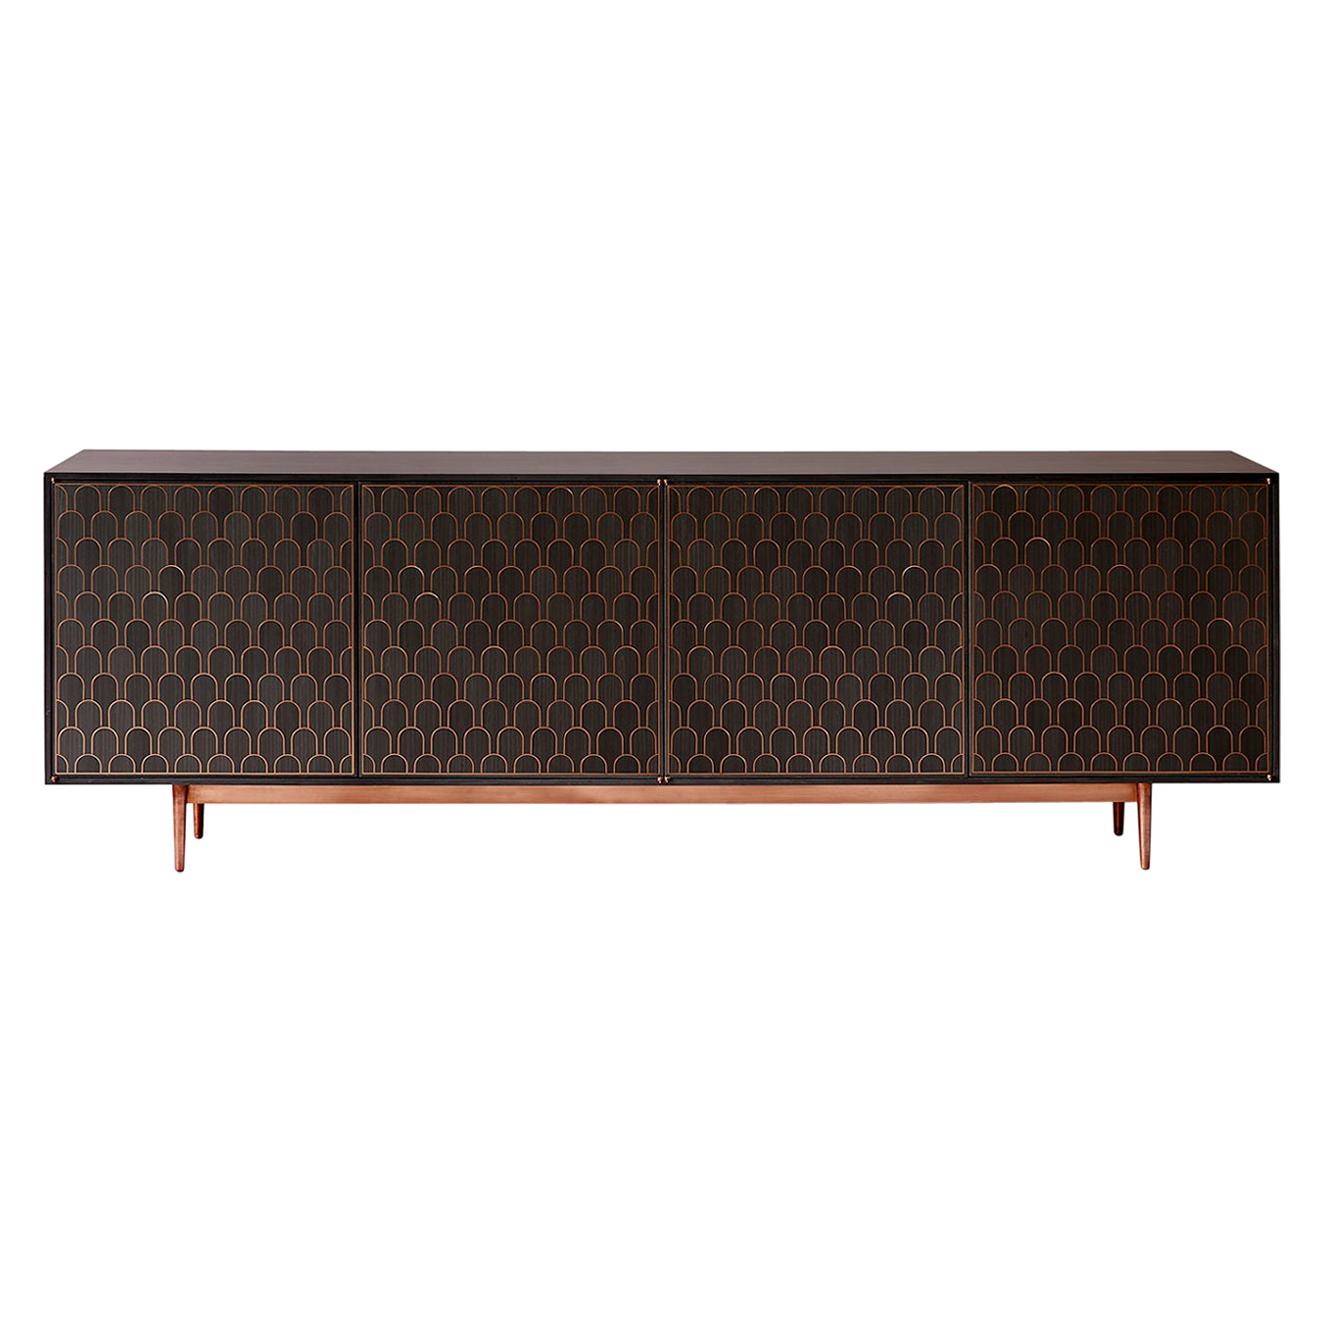 Bethan Gray MAXI Nizwa Four-Door Cabinet in Charcoal and Brass